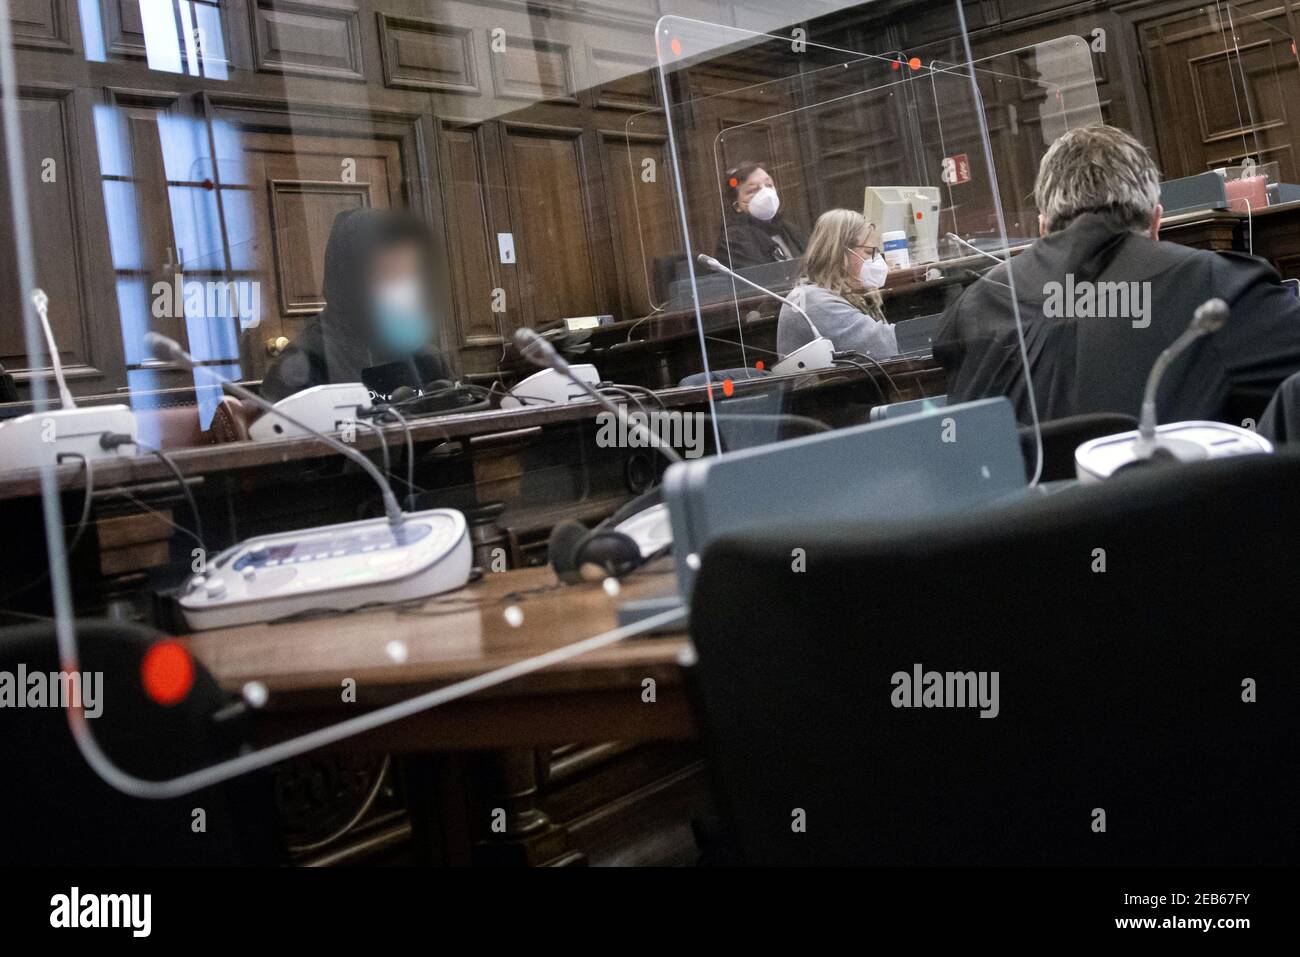 12 February 2021, Hamburg: The 29-year-old defendant (l), his lawyer Fabian Hellweg (r) and other participants in the trial sit in the courtroom in the Criminal Justice Building before the start of the safeguarding proceedings. A good four months after the attack on a Jewish student outside the Hamburg synagogue, the trial of the alleged perpetrator began on Friday. According to a psychiatric report, the German citizen, who was born in Kazakhstan, is incapable of guilt. Photo: Christian Charisius/dpa/Pool/dpa - ATTENTION: Person(s) have been pixelated for legal reasons Stock Photo